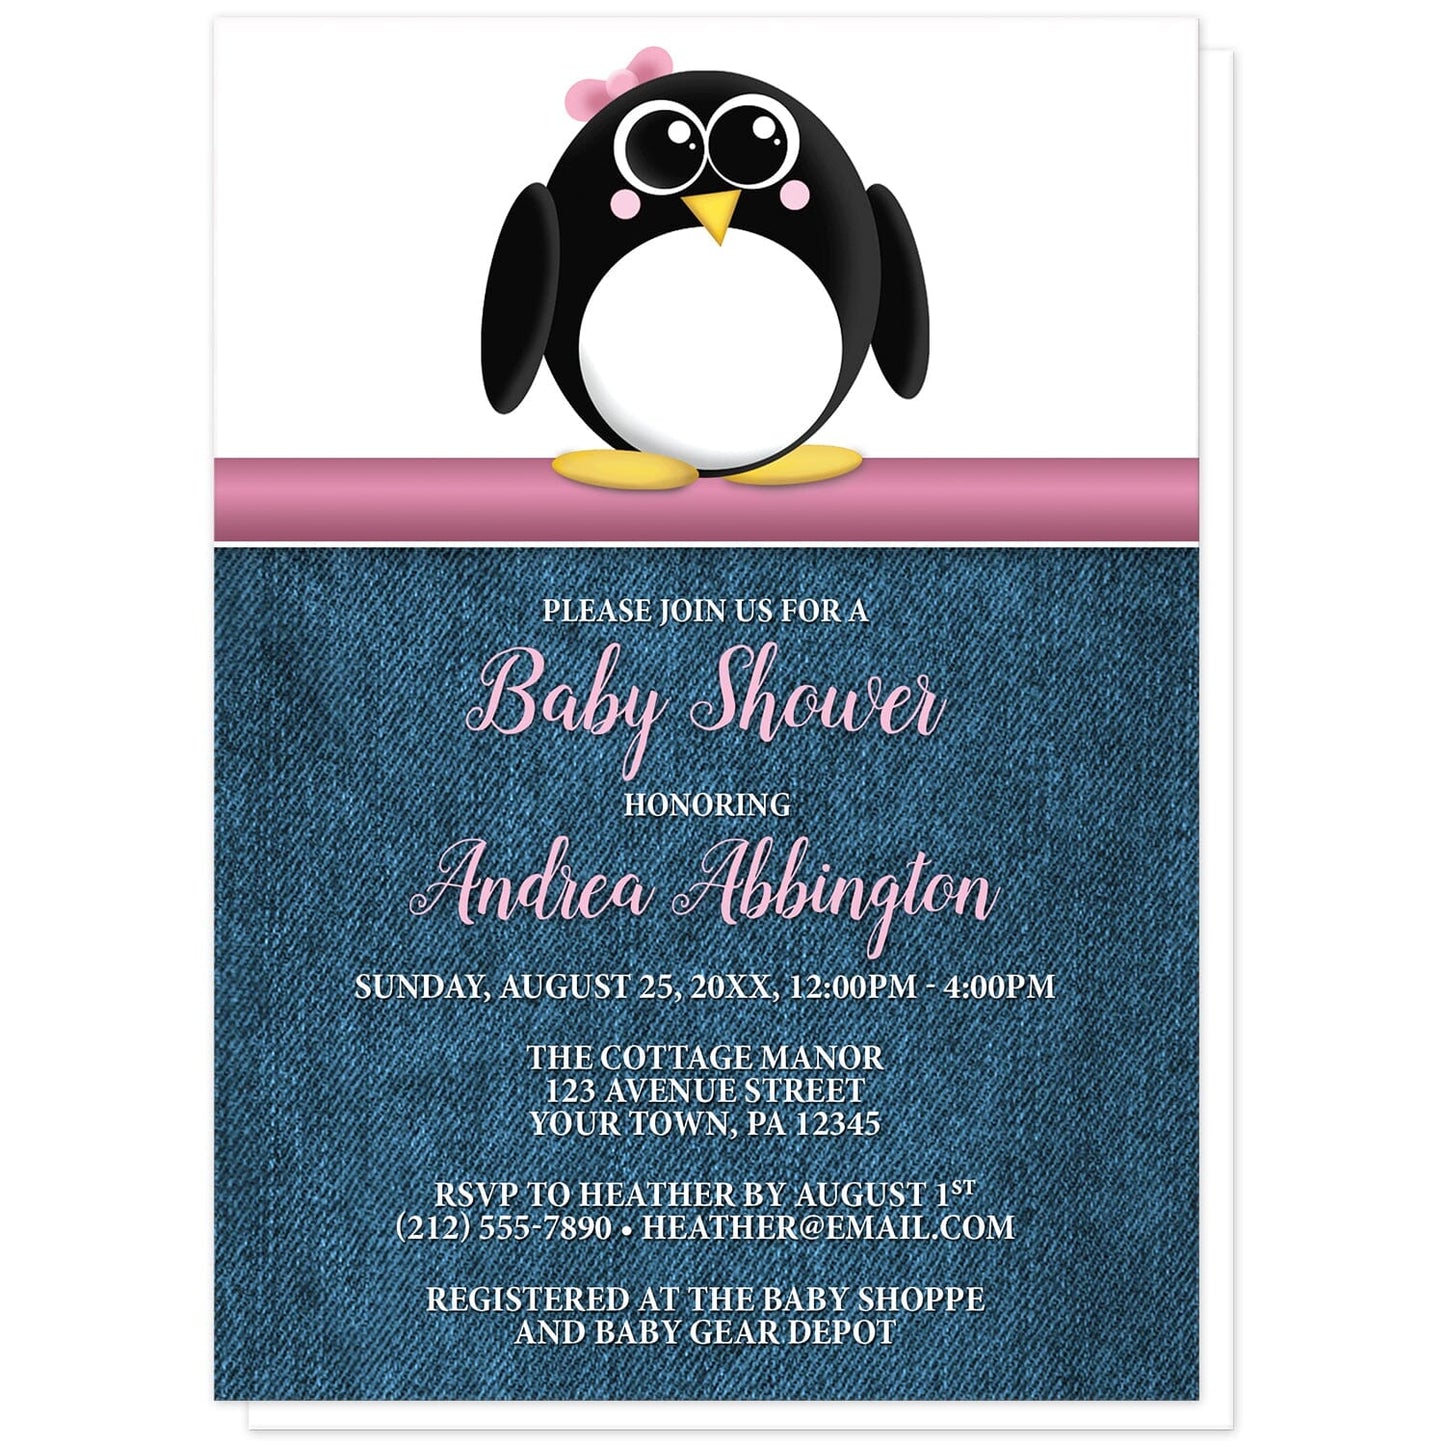 Cute Penguin Pink Rustic Denim Baby Shower Invitations at Artistically Invited. Cute penguin pink rustic denim baby shower invitations with an illustration of an adorable black and white penguin with a little pink bow. This cute little penguin stands on a horizontal pink stripe. The personalized information you provide for your baby shower celebration will be custom printed in pink and white over a rustic blue denim background.